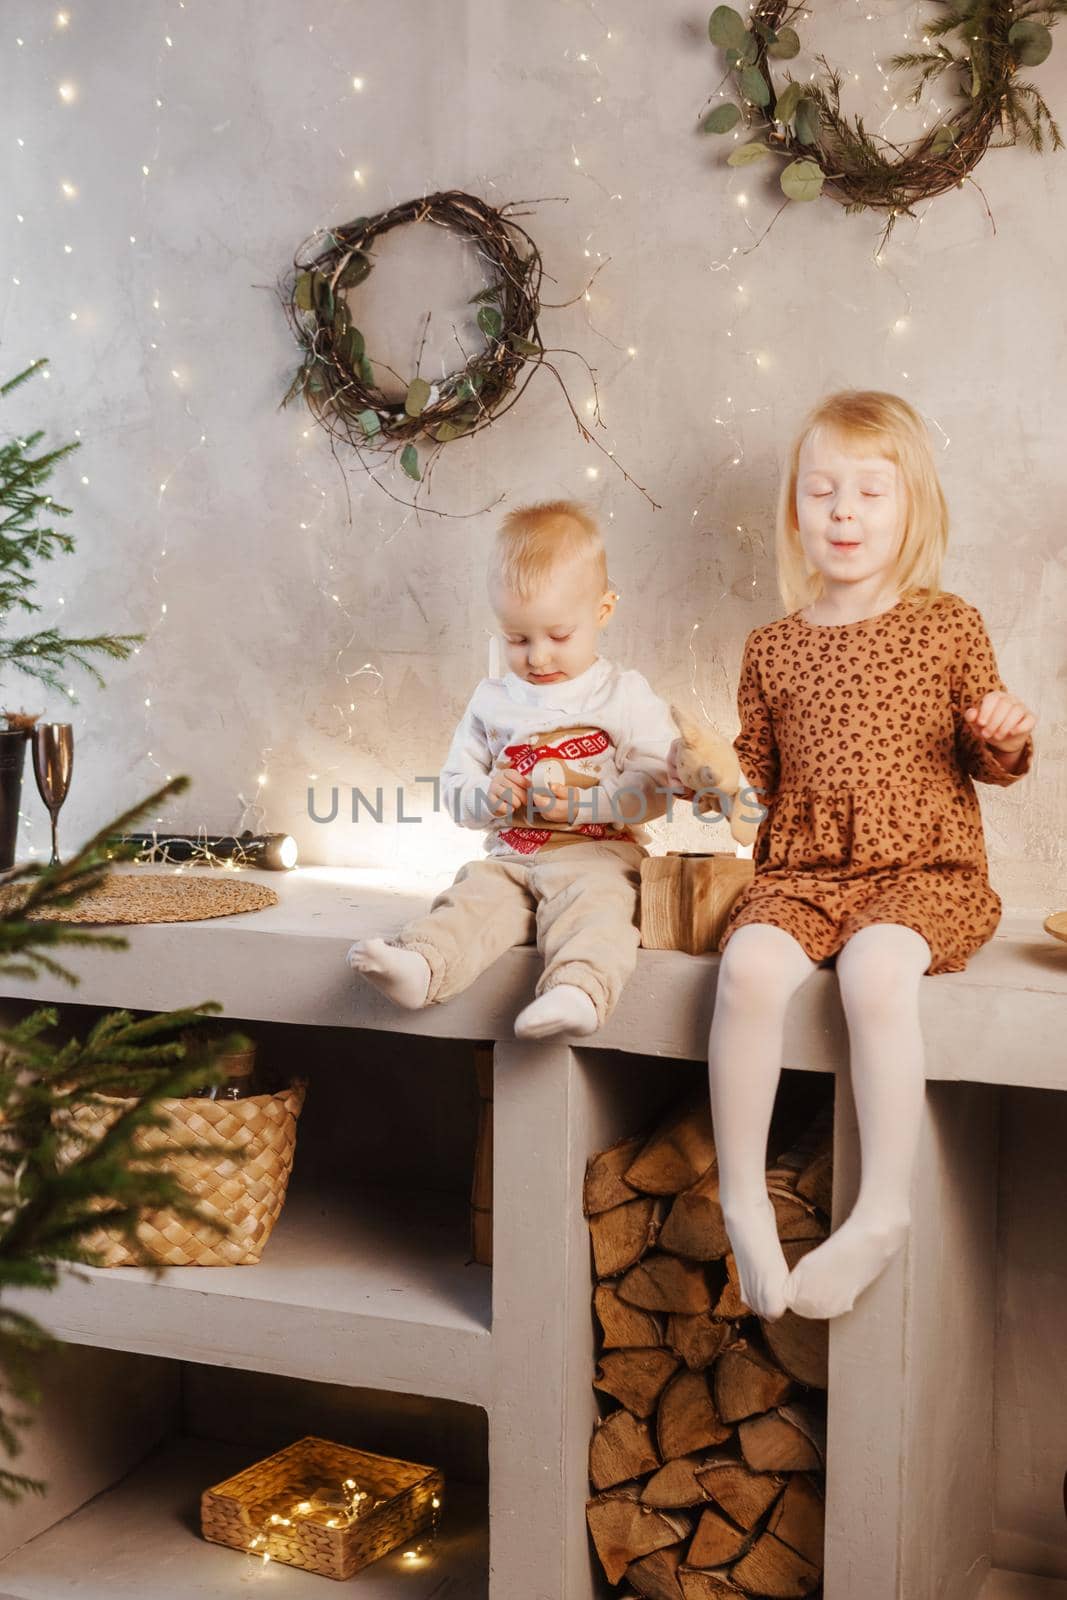 Little brother and sister play on Christmas eve in a beautiful house decorated for the New Year holidays. Children are playing with a Christmas gift. Scandinavian-style interior with live fir trees and a wooden staircase.